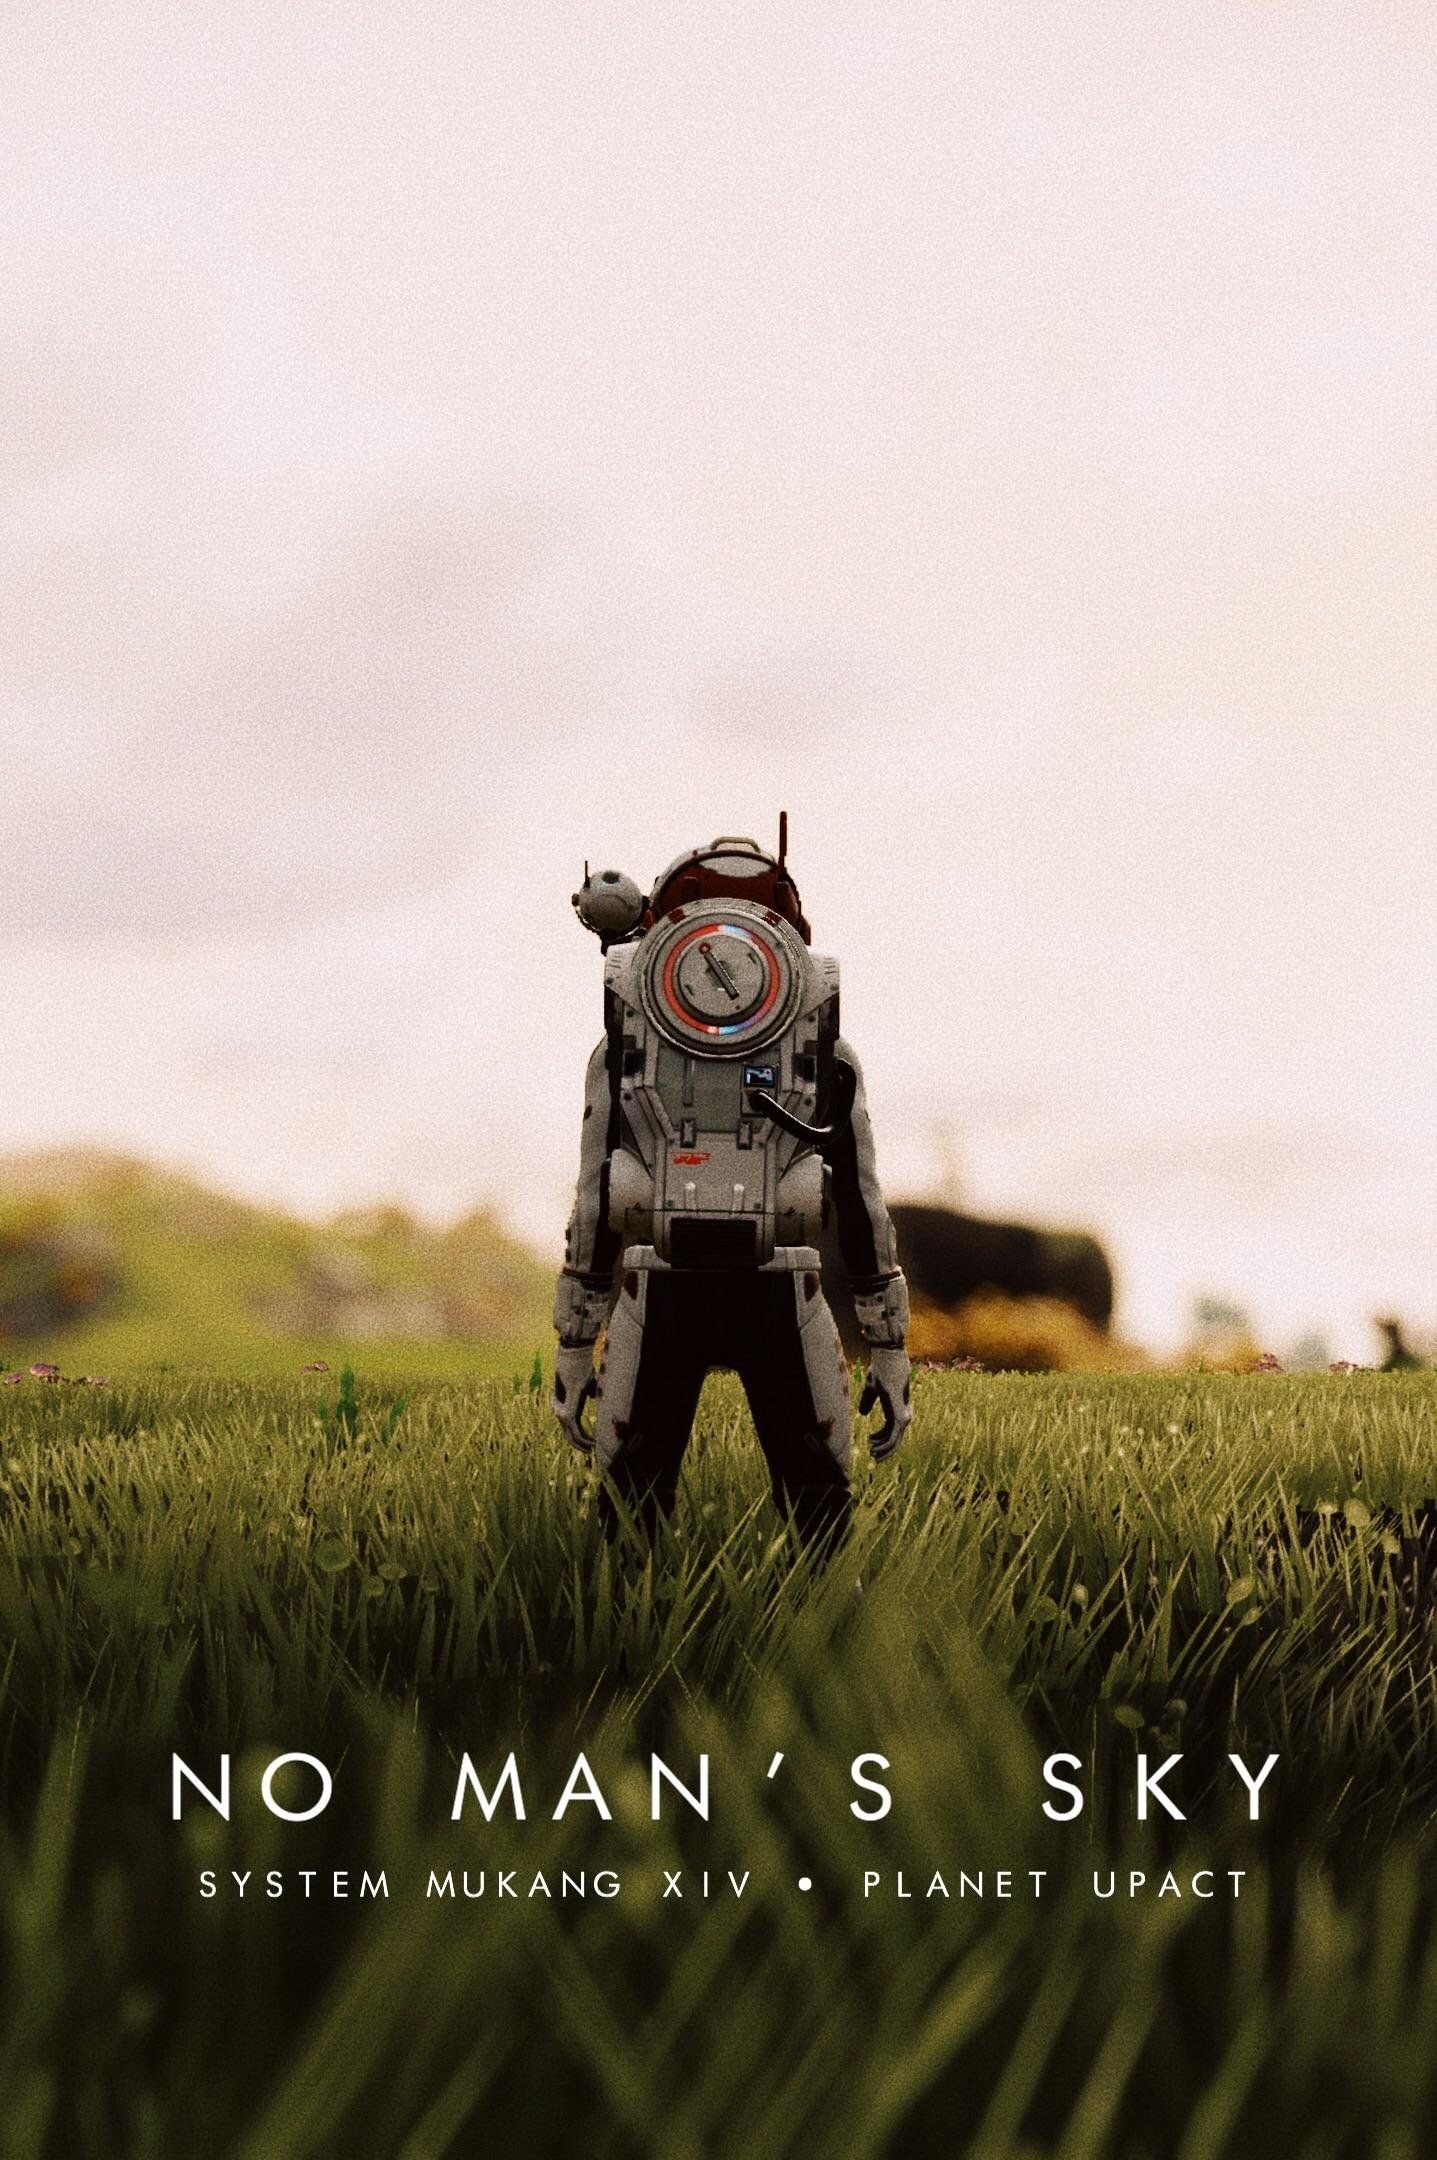 No Man's Sky mobile wallpapers, Phone background images, HD gaming art, Captivating visuals, 1440x2160 HD Handy